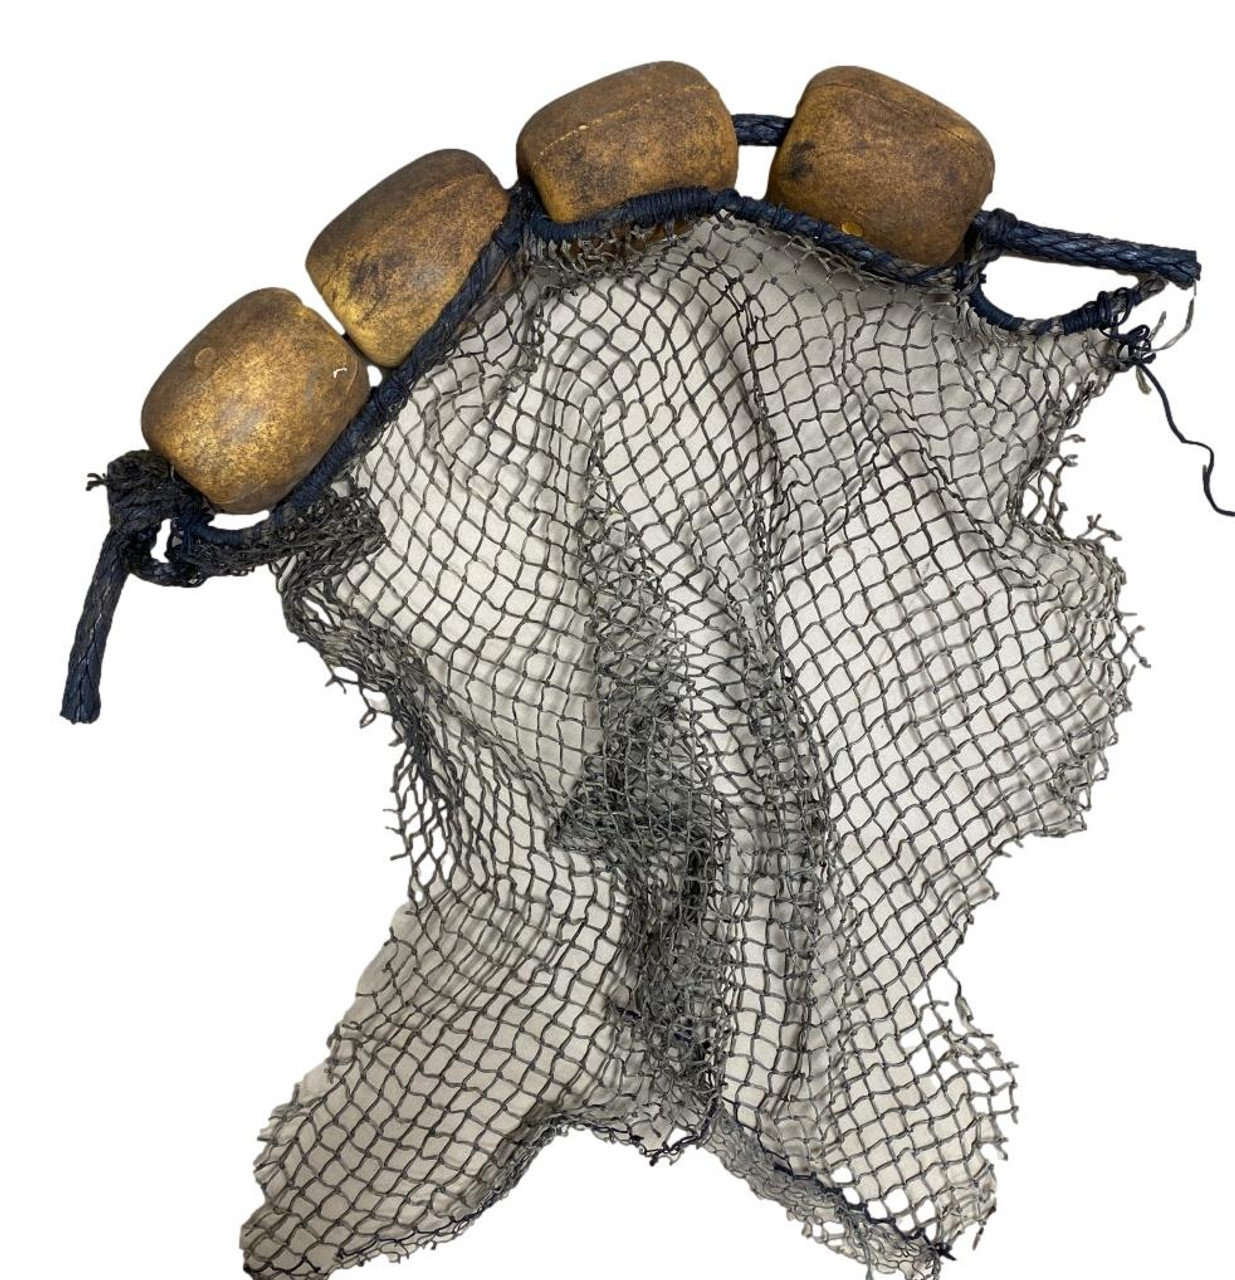 Old Vintage Style Cork Fishing Floats, Rope Fish Net